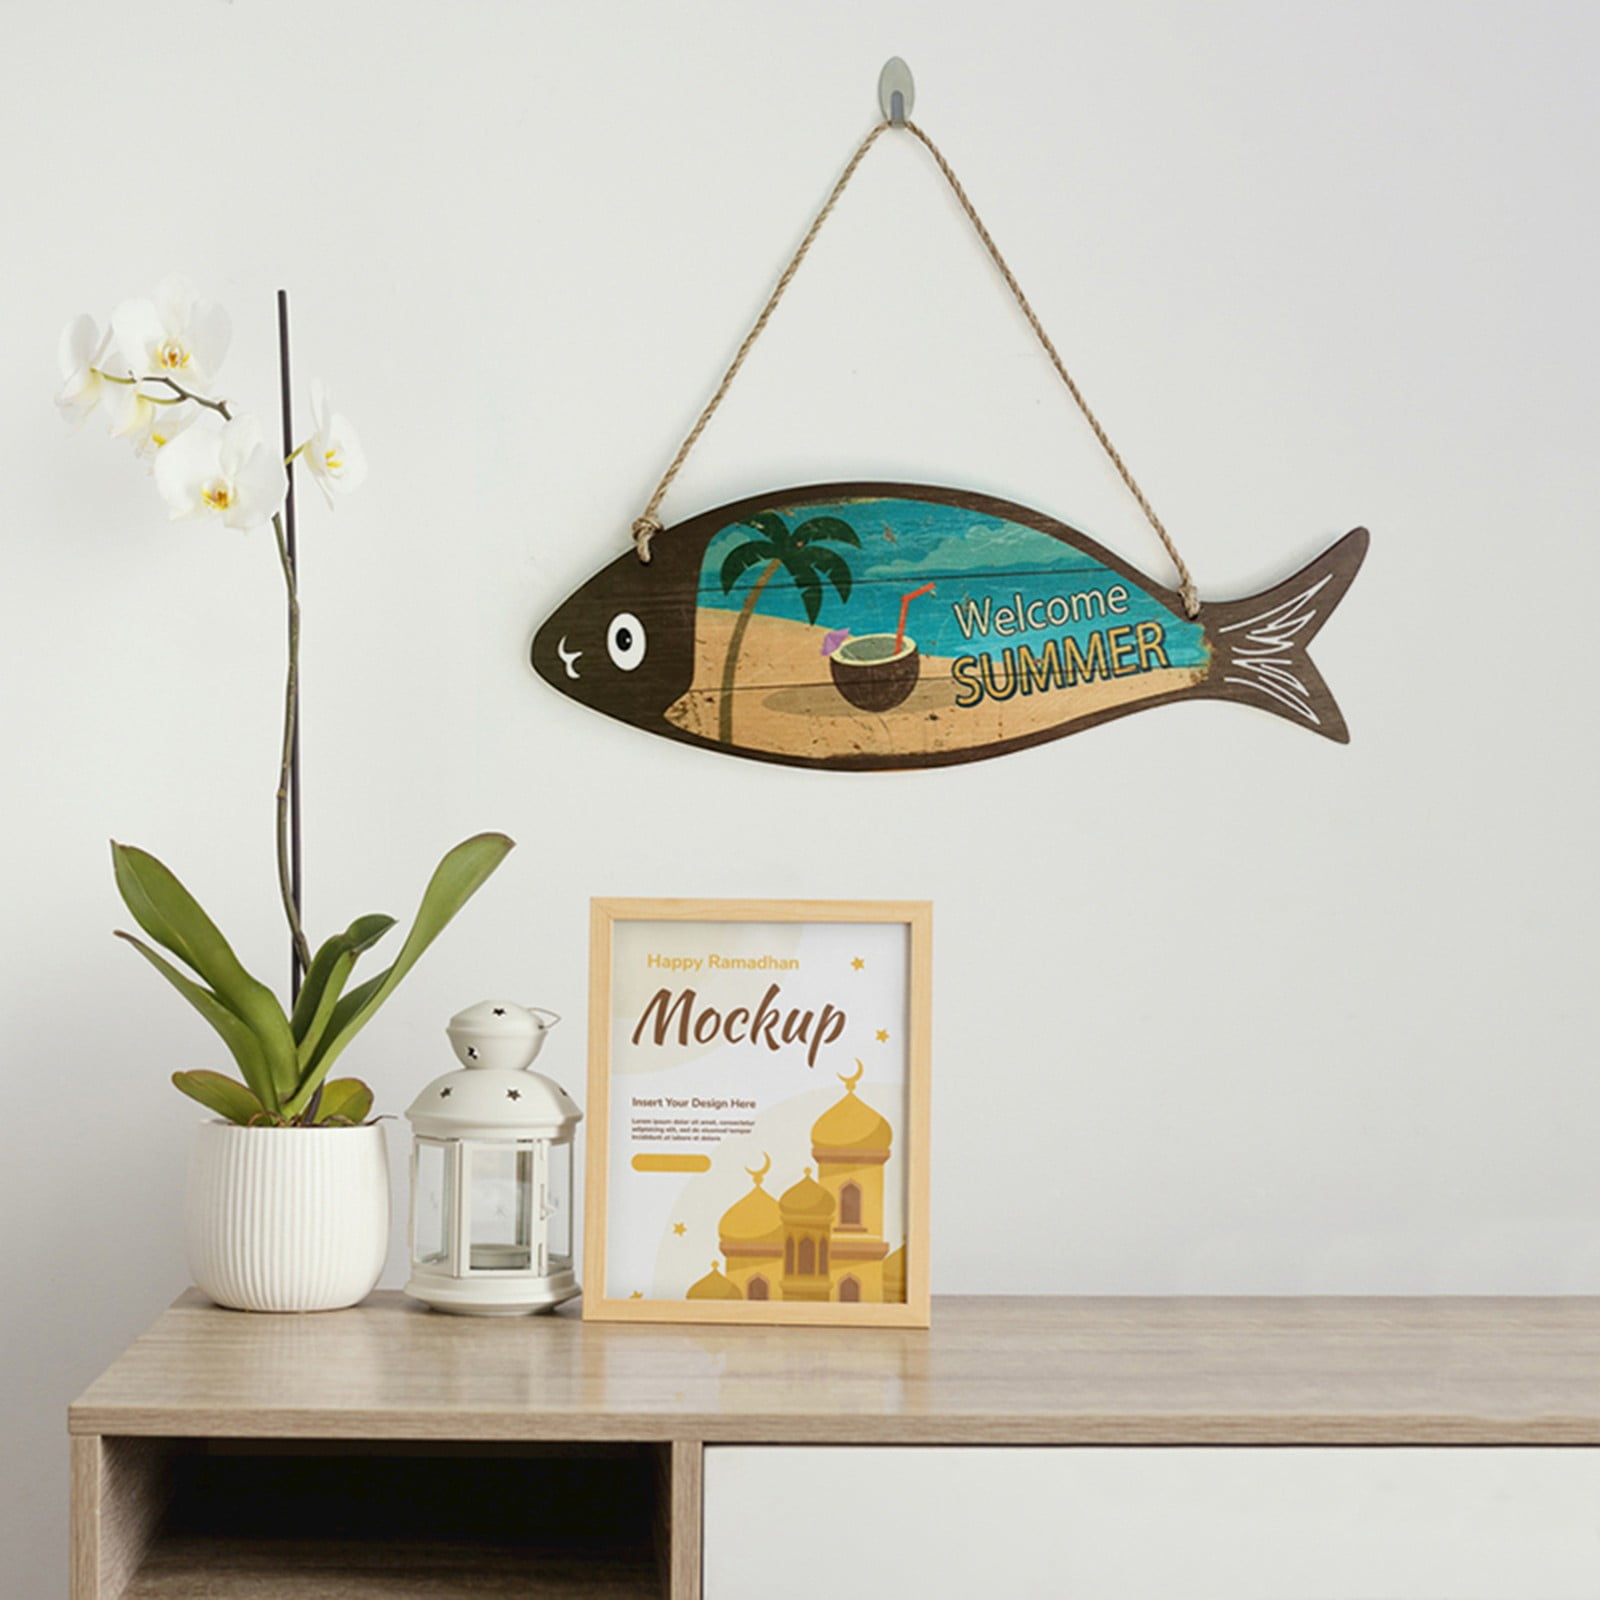 Share more than 170 fish wall decor for bathroom latest